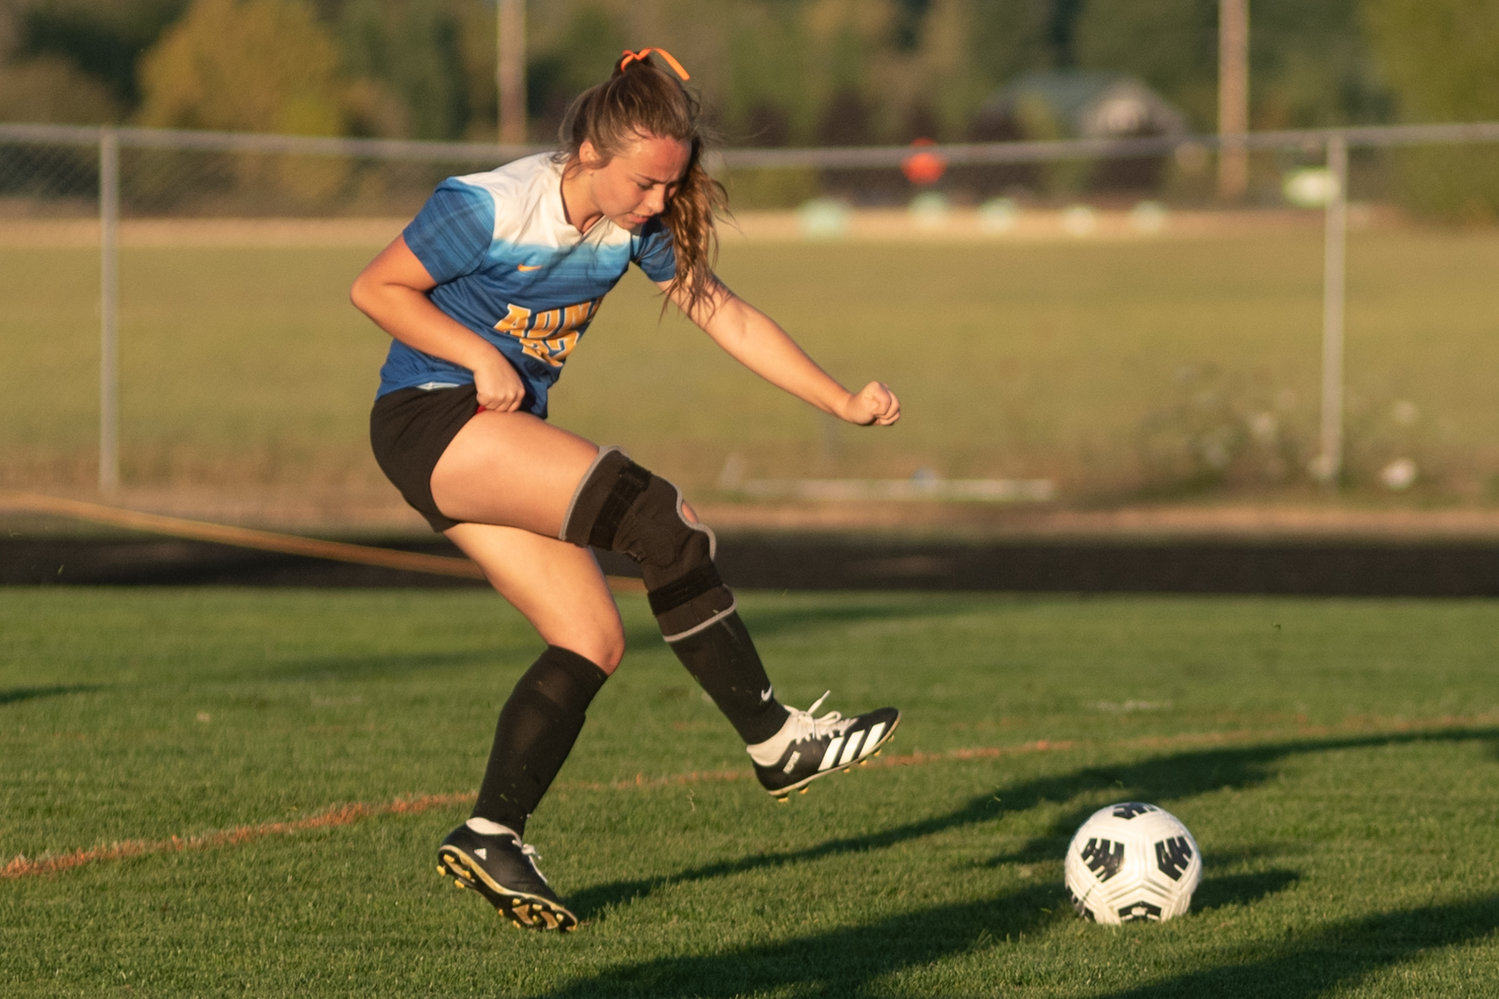 Junior forward Destiny Roller fires a shot at goal for Adna in the Pirates 2-1 loss to Onalaska Monday afternoon.